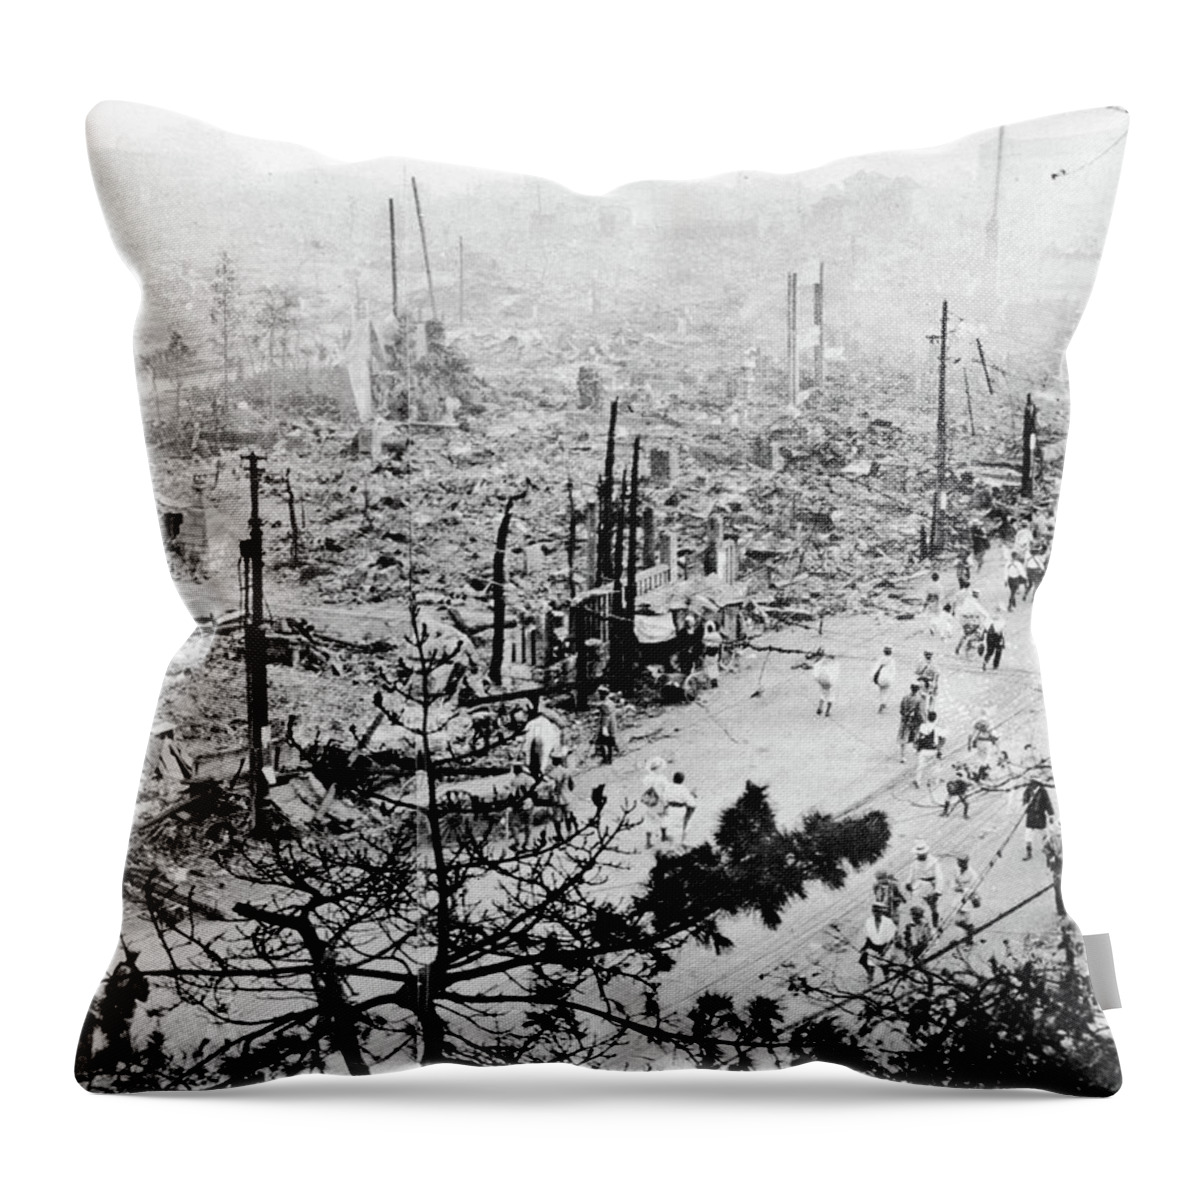 1923 Throw Pillow featuring the photograph Tokyo Earthquake, 1923 #8 by Granger